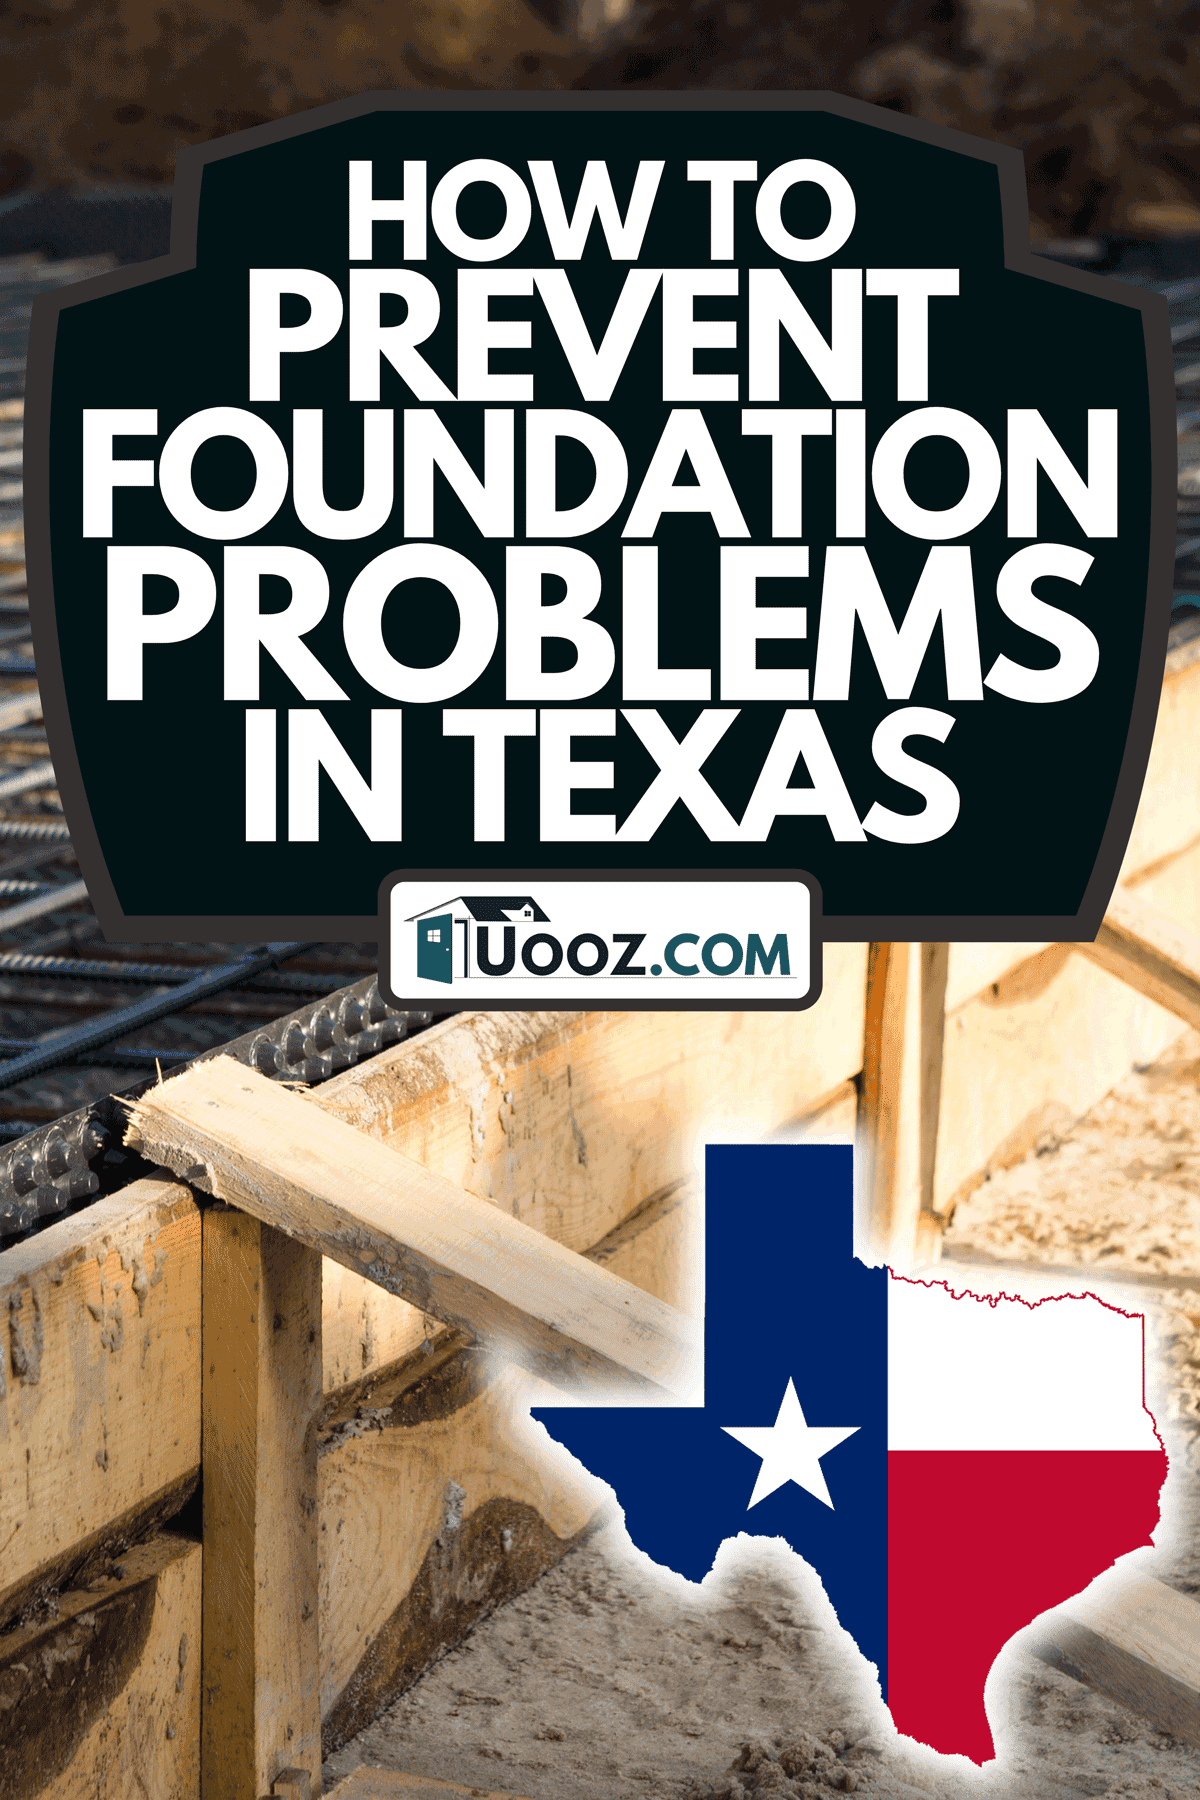 Foundation of the house with a concrete slab and a Texas flag, How To Prevent Foundation Problems In Texas